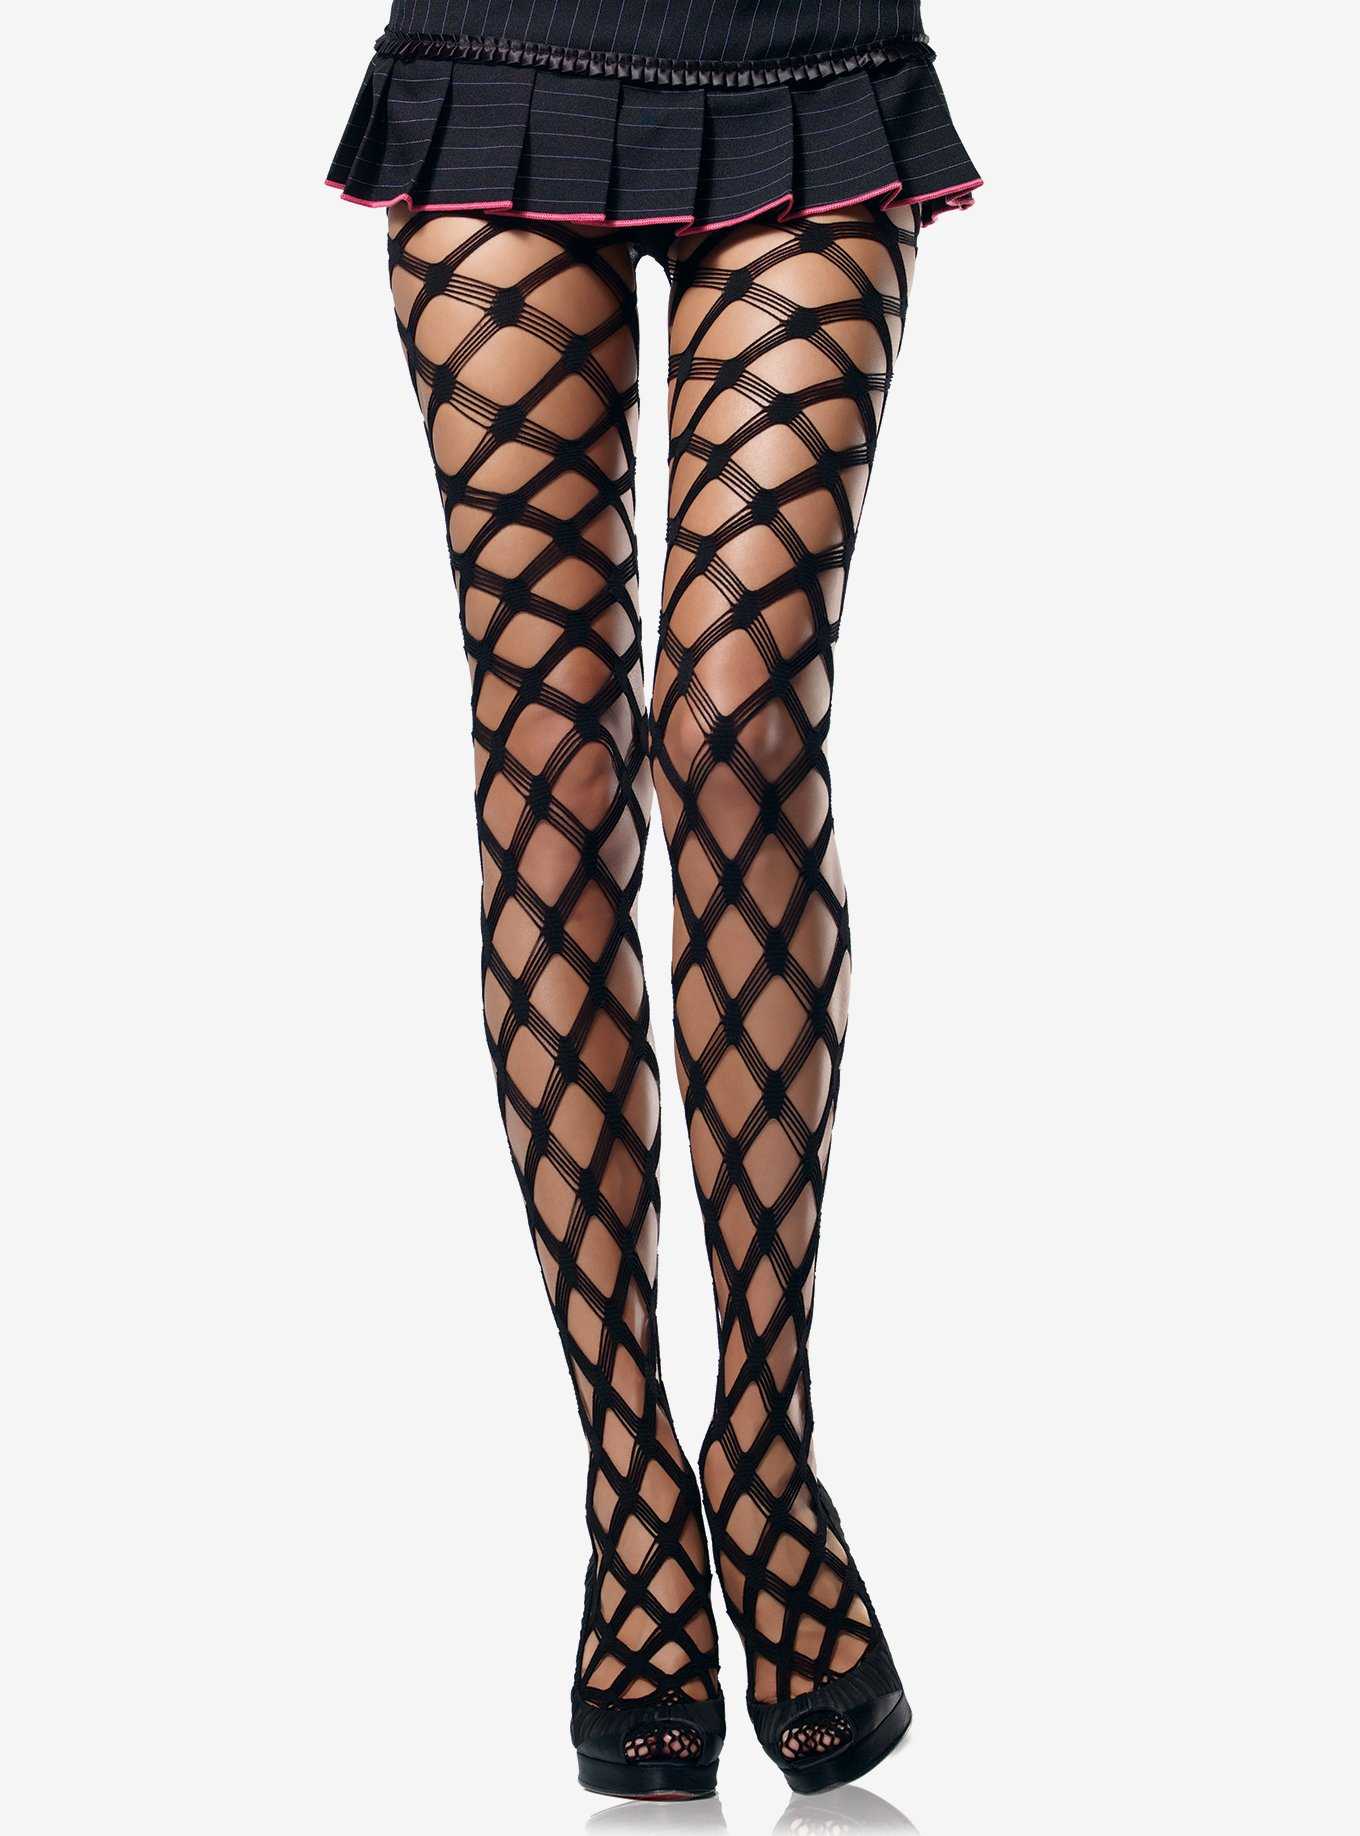 Hot Topic Vintage Pinstripe Net Tights